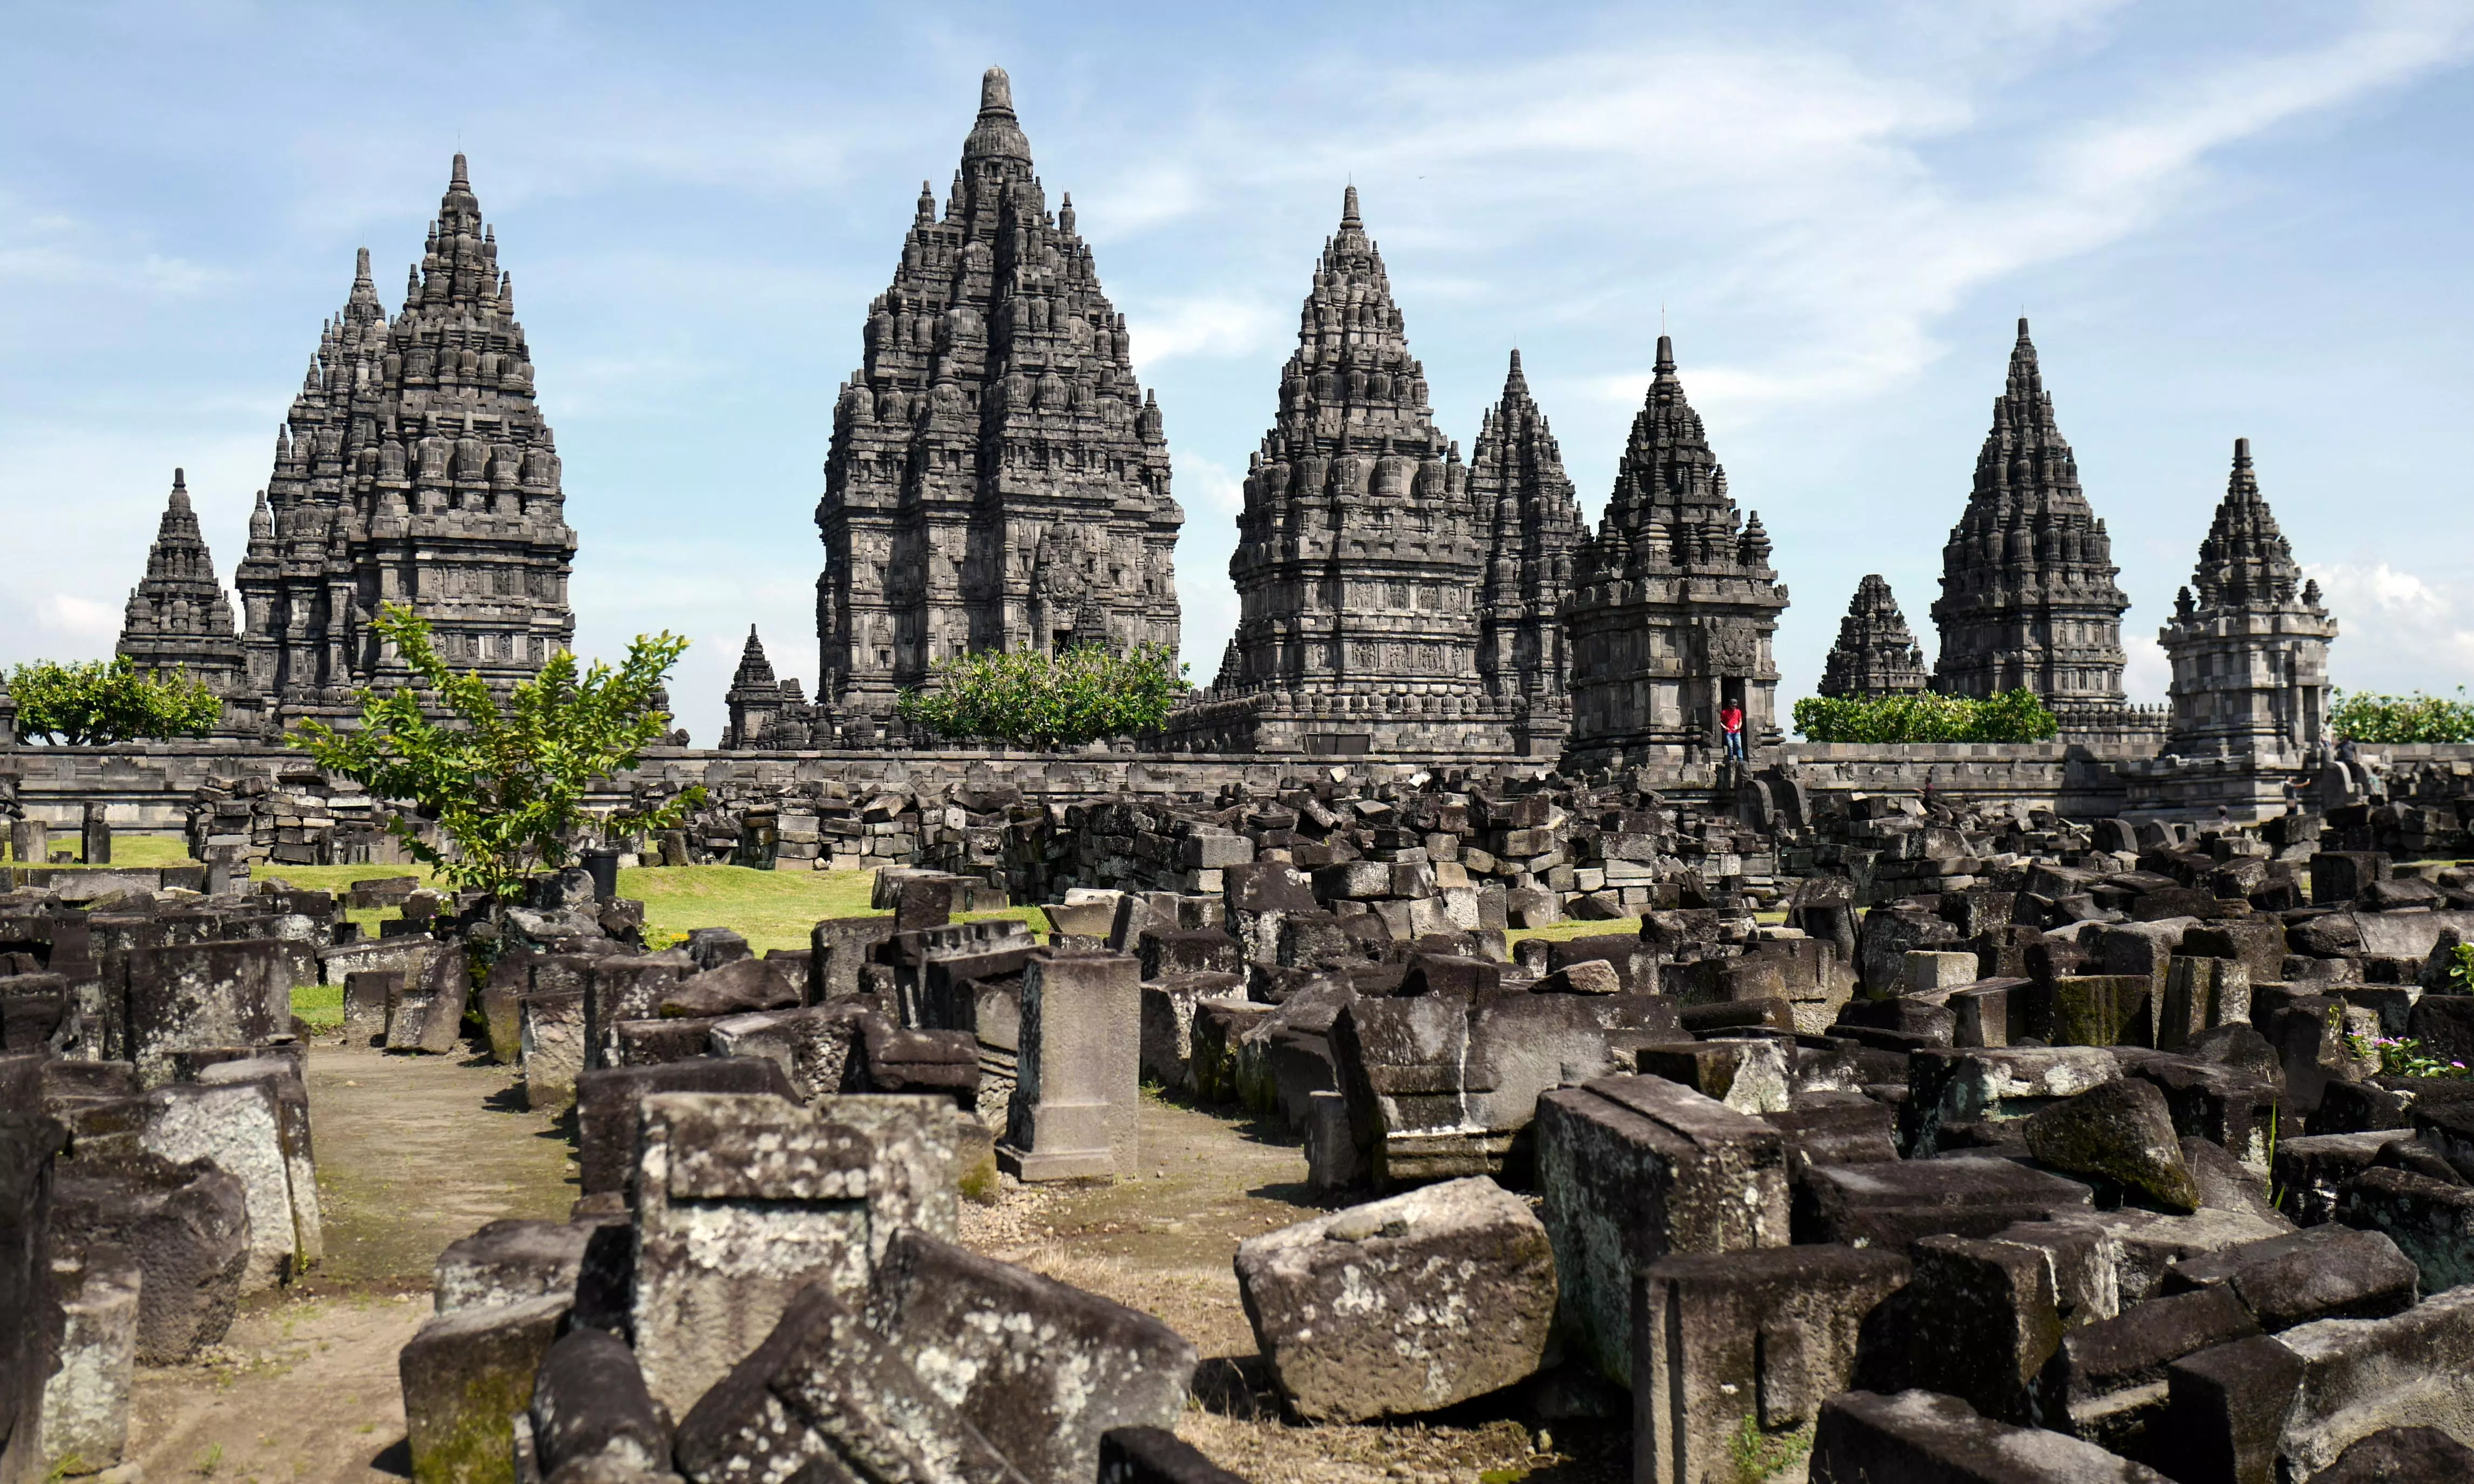 Indonesias Prambanan temple is a testimony to Indias deep-rooted cultural ties with SE Asia